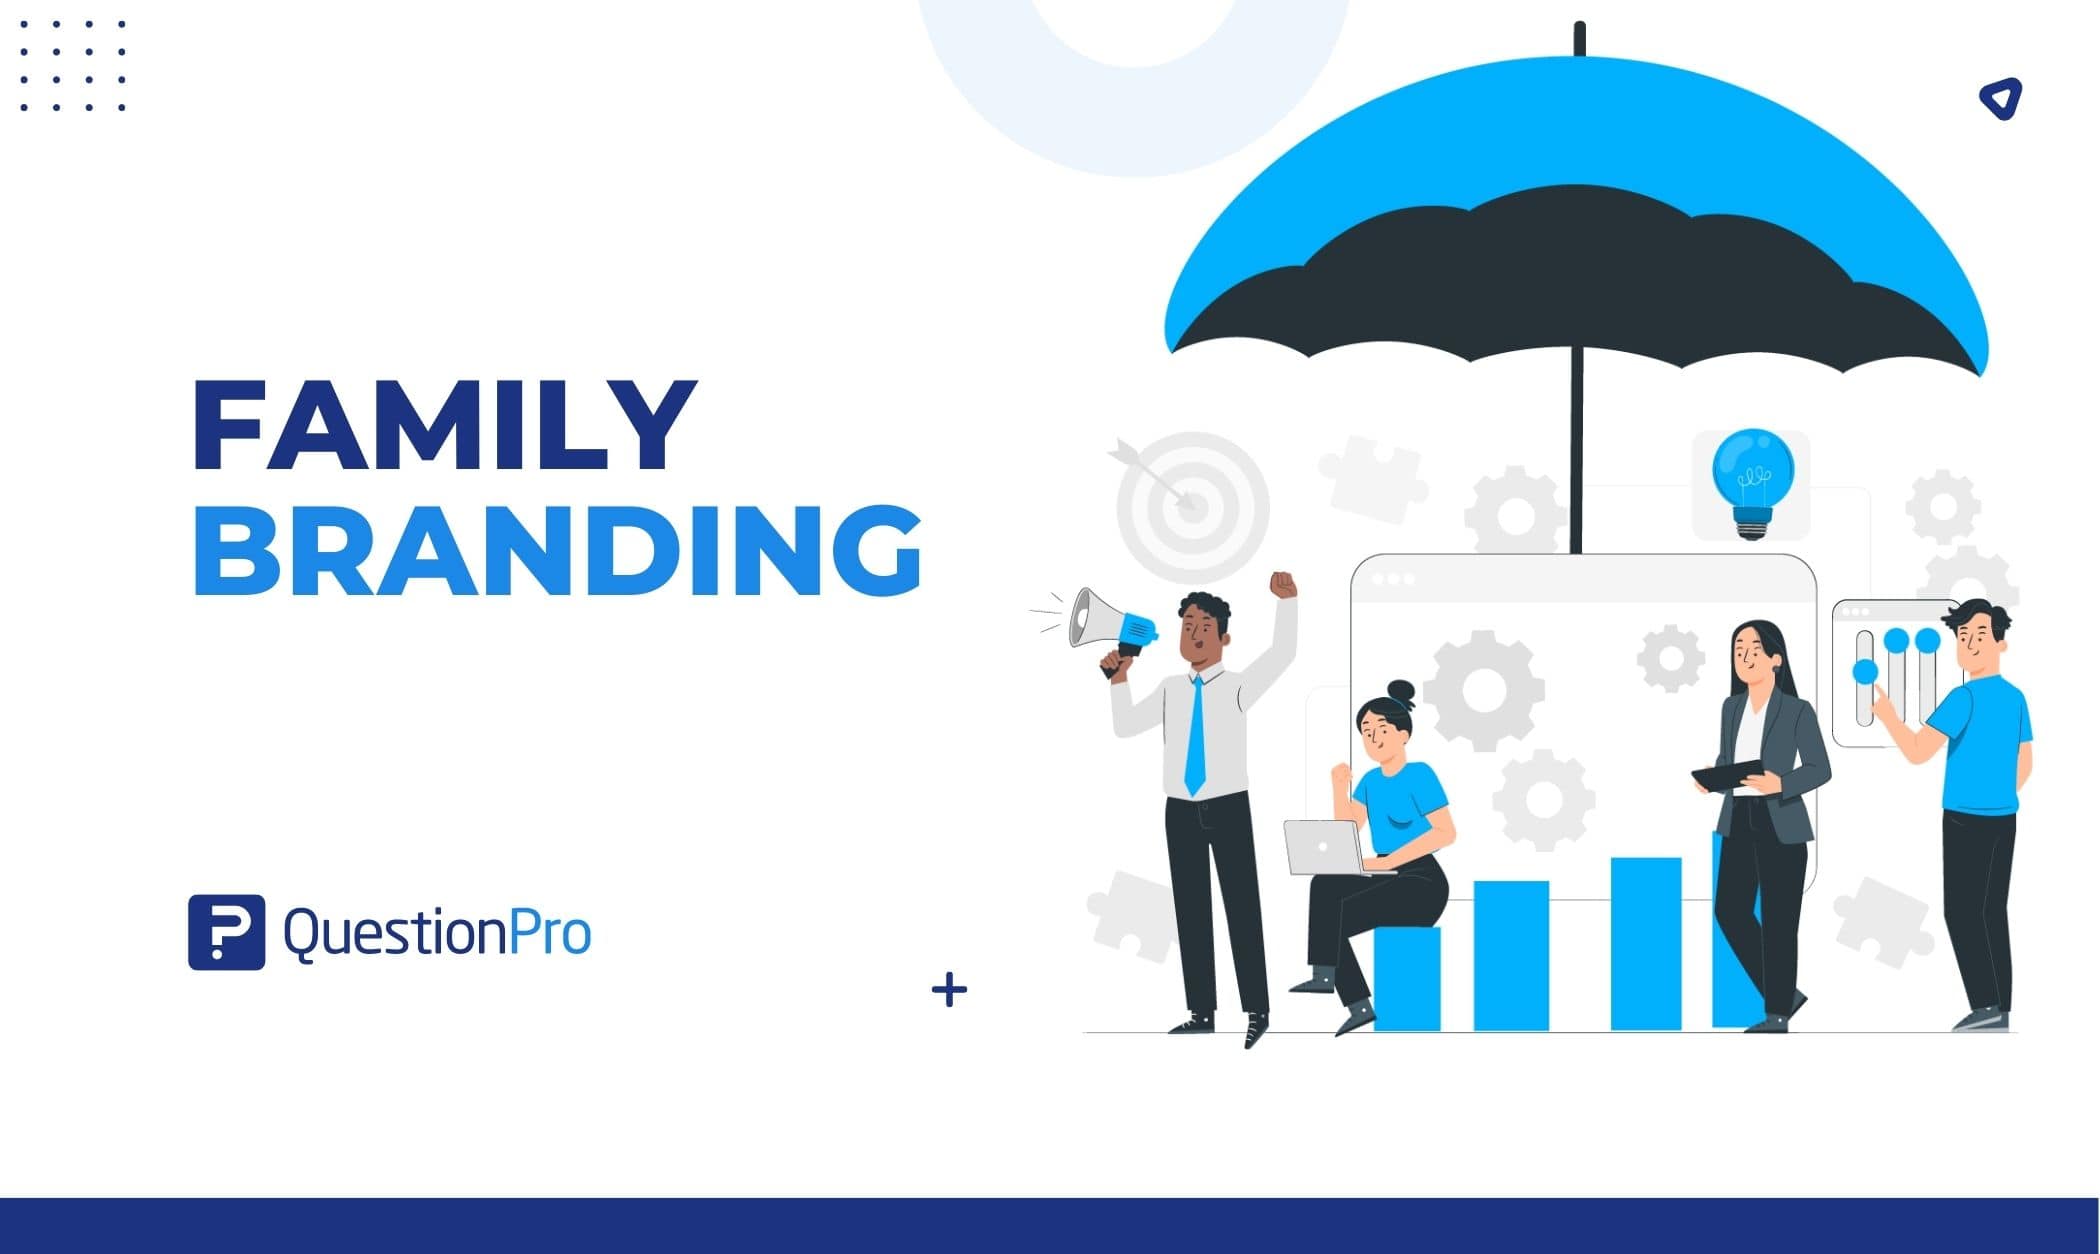 Family Branding - Definition, Overview and Examples